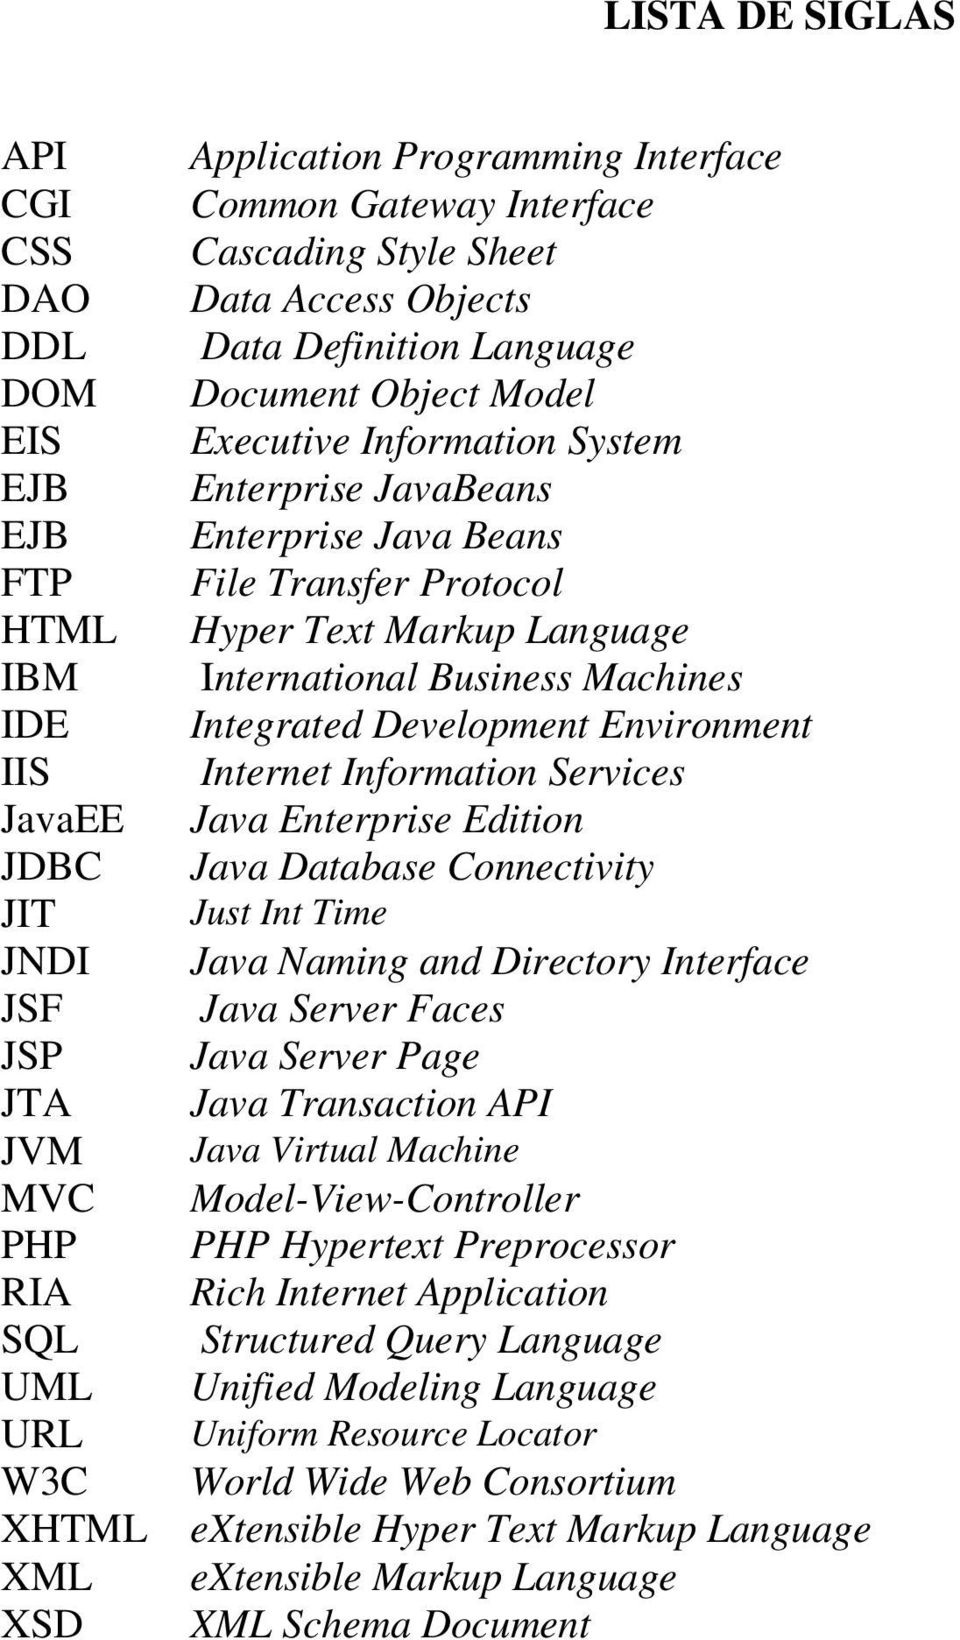 Protocol Hyper Text Markup Language International Business Machines Integrated Development Environment Internet Information Services Java Enterprise Edition Java Database Connectivity Just Int Time